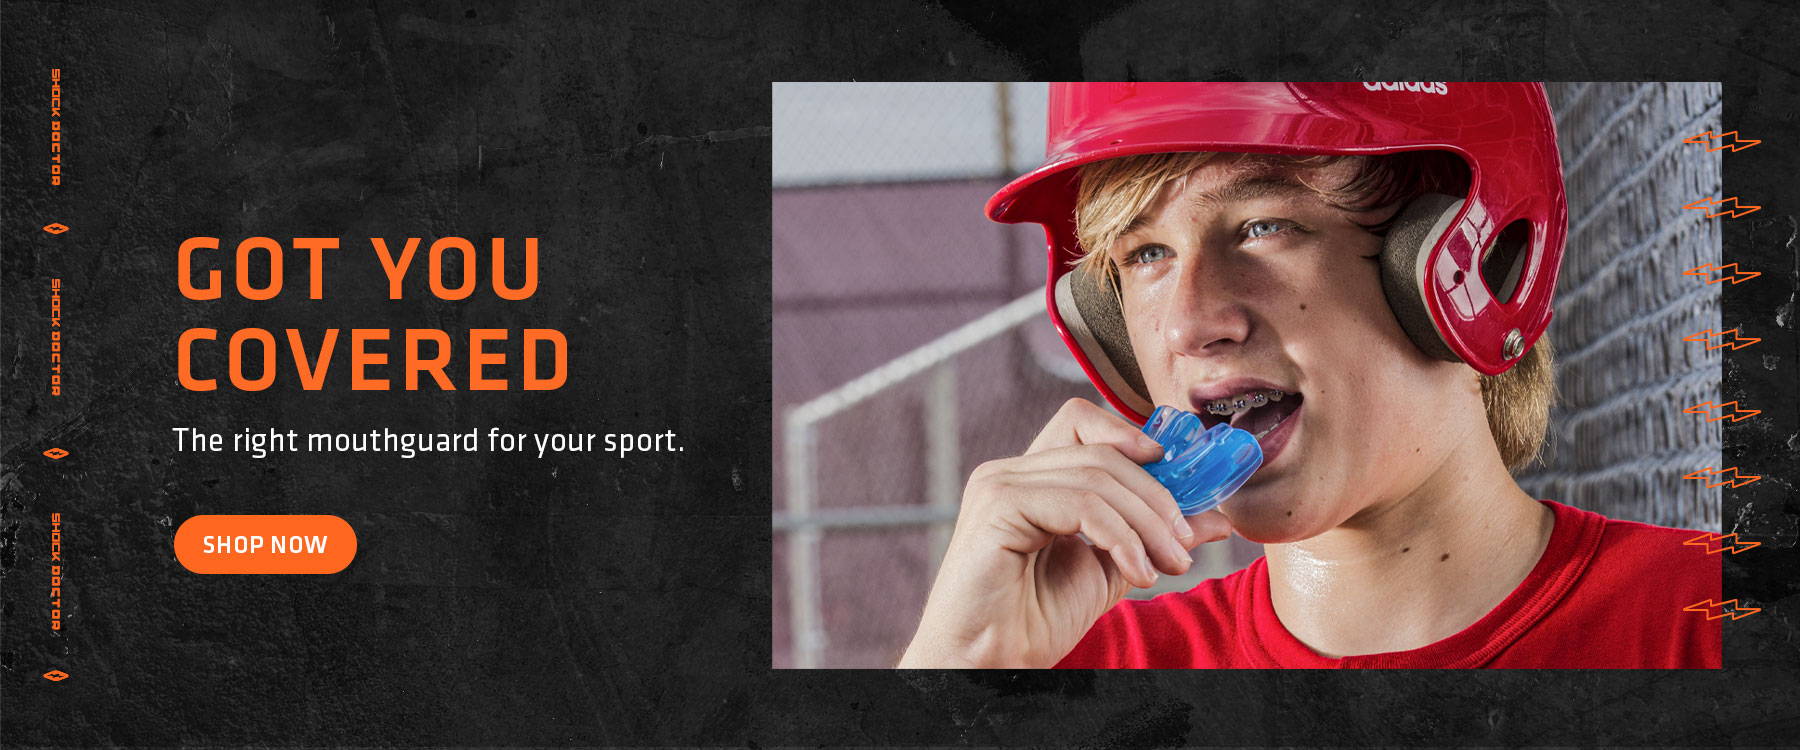 Got You Covered - The right mouthguard for your sport - SHOP NOW